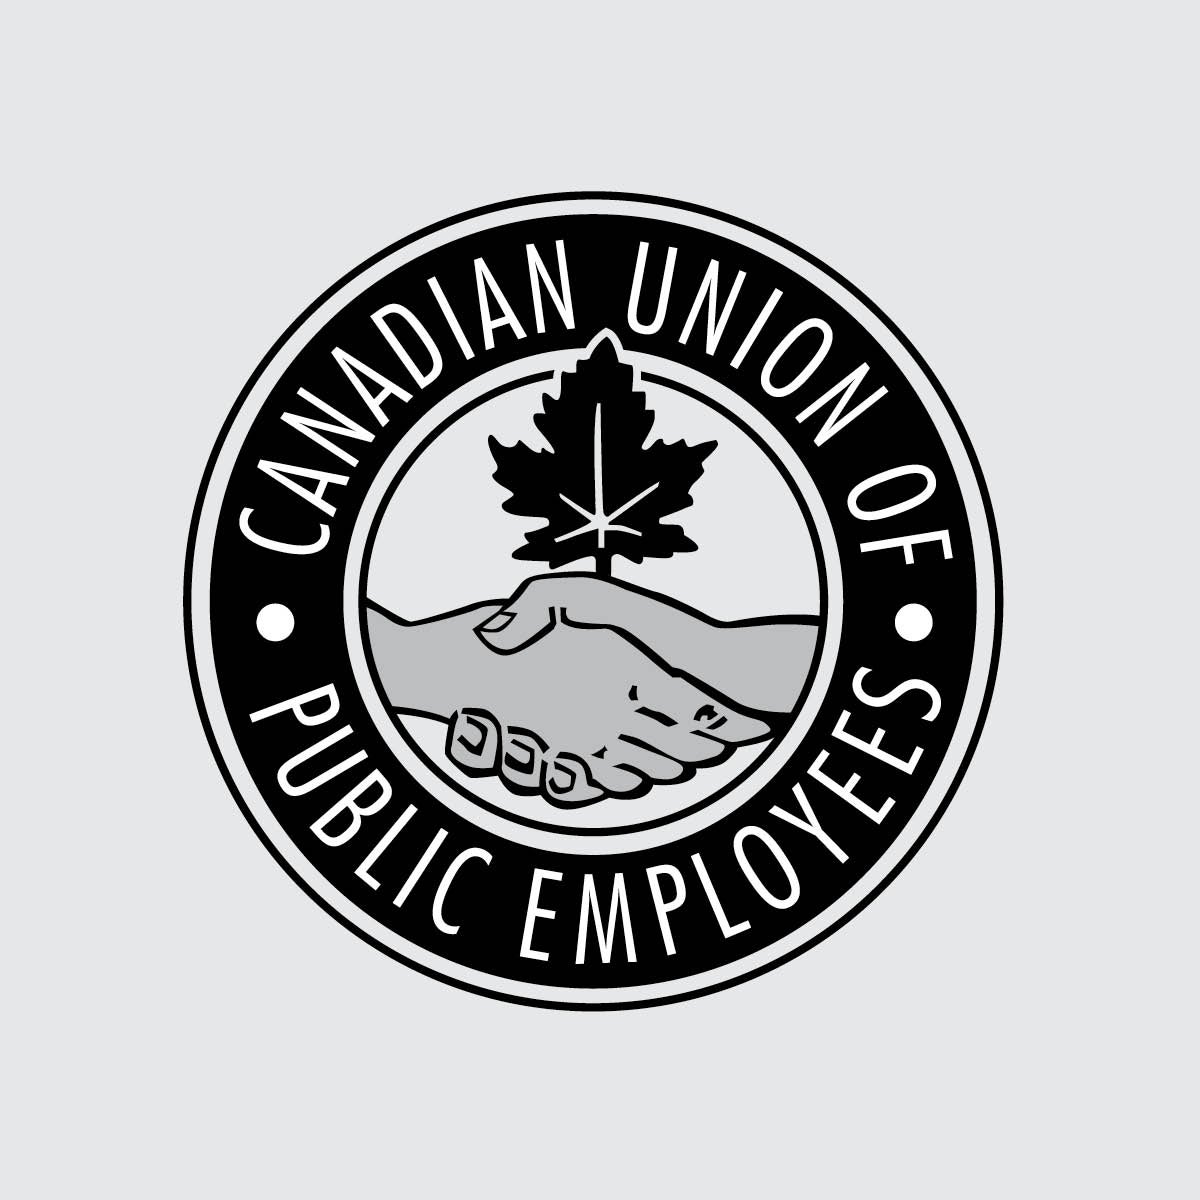 CUPE's first logo